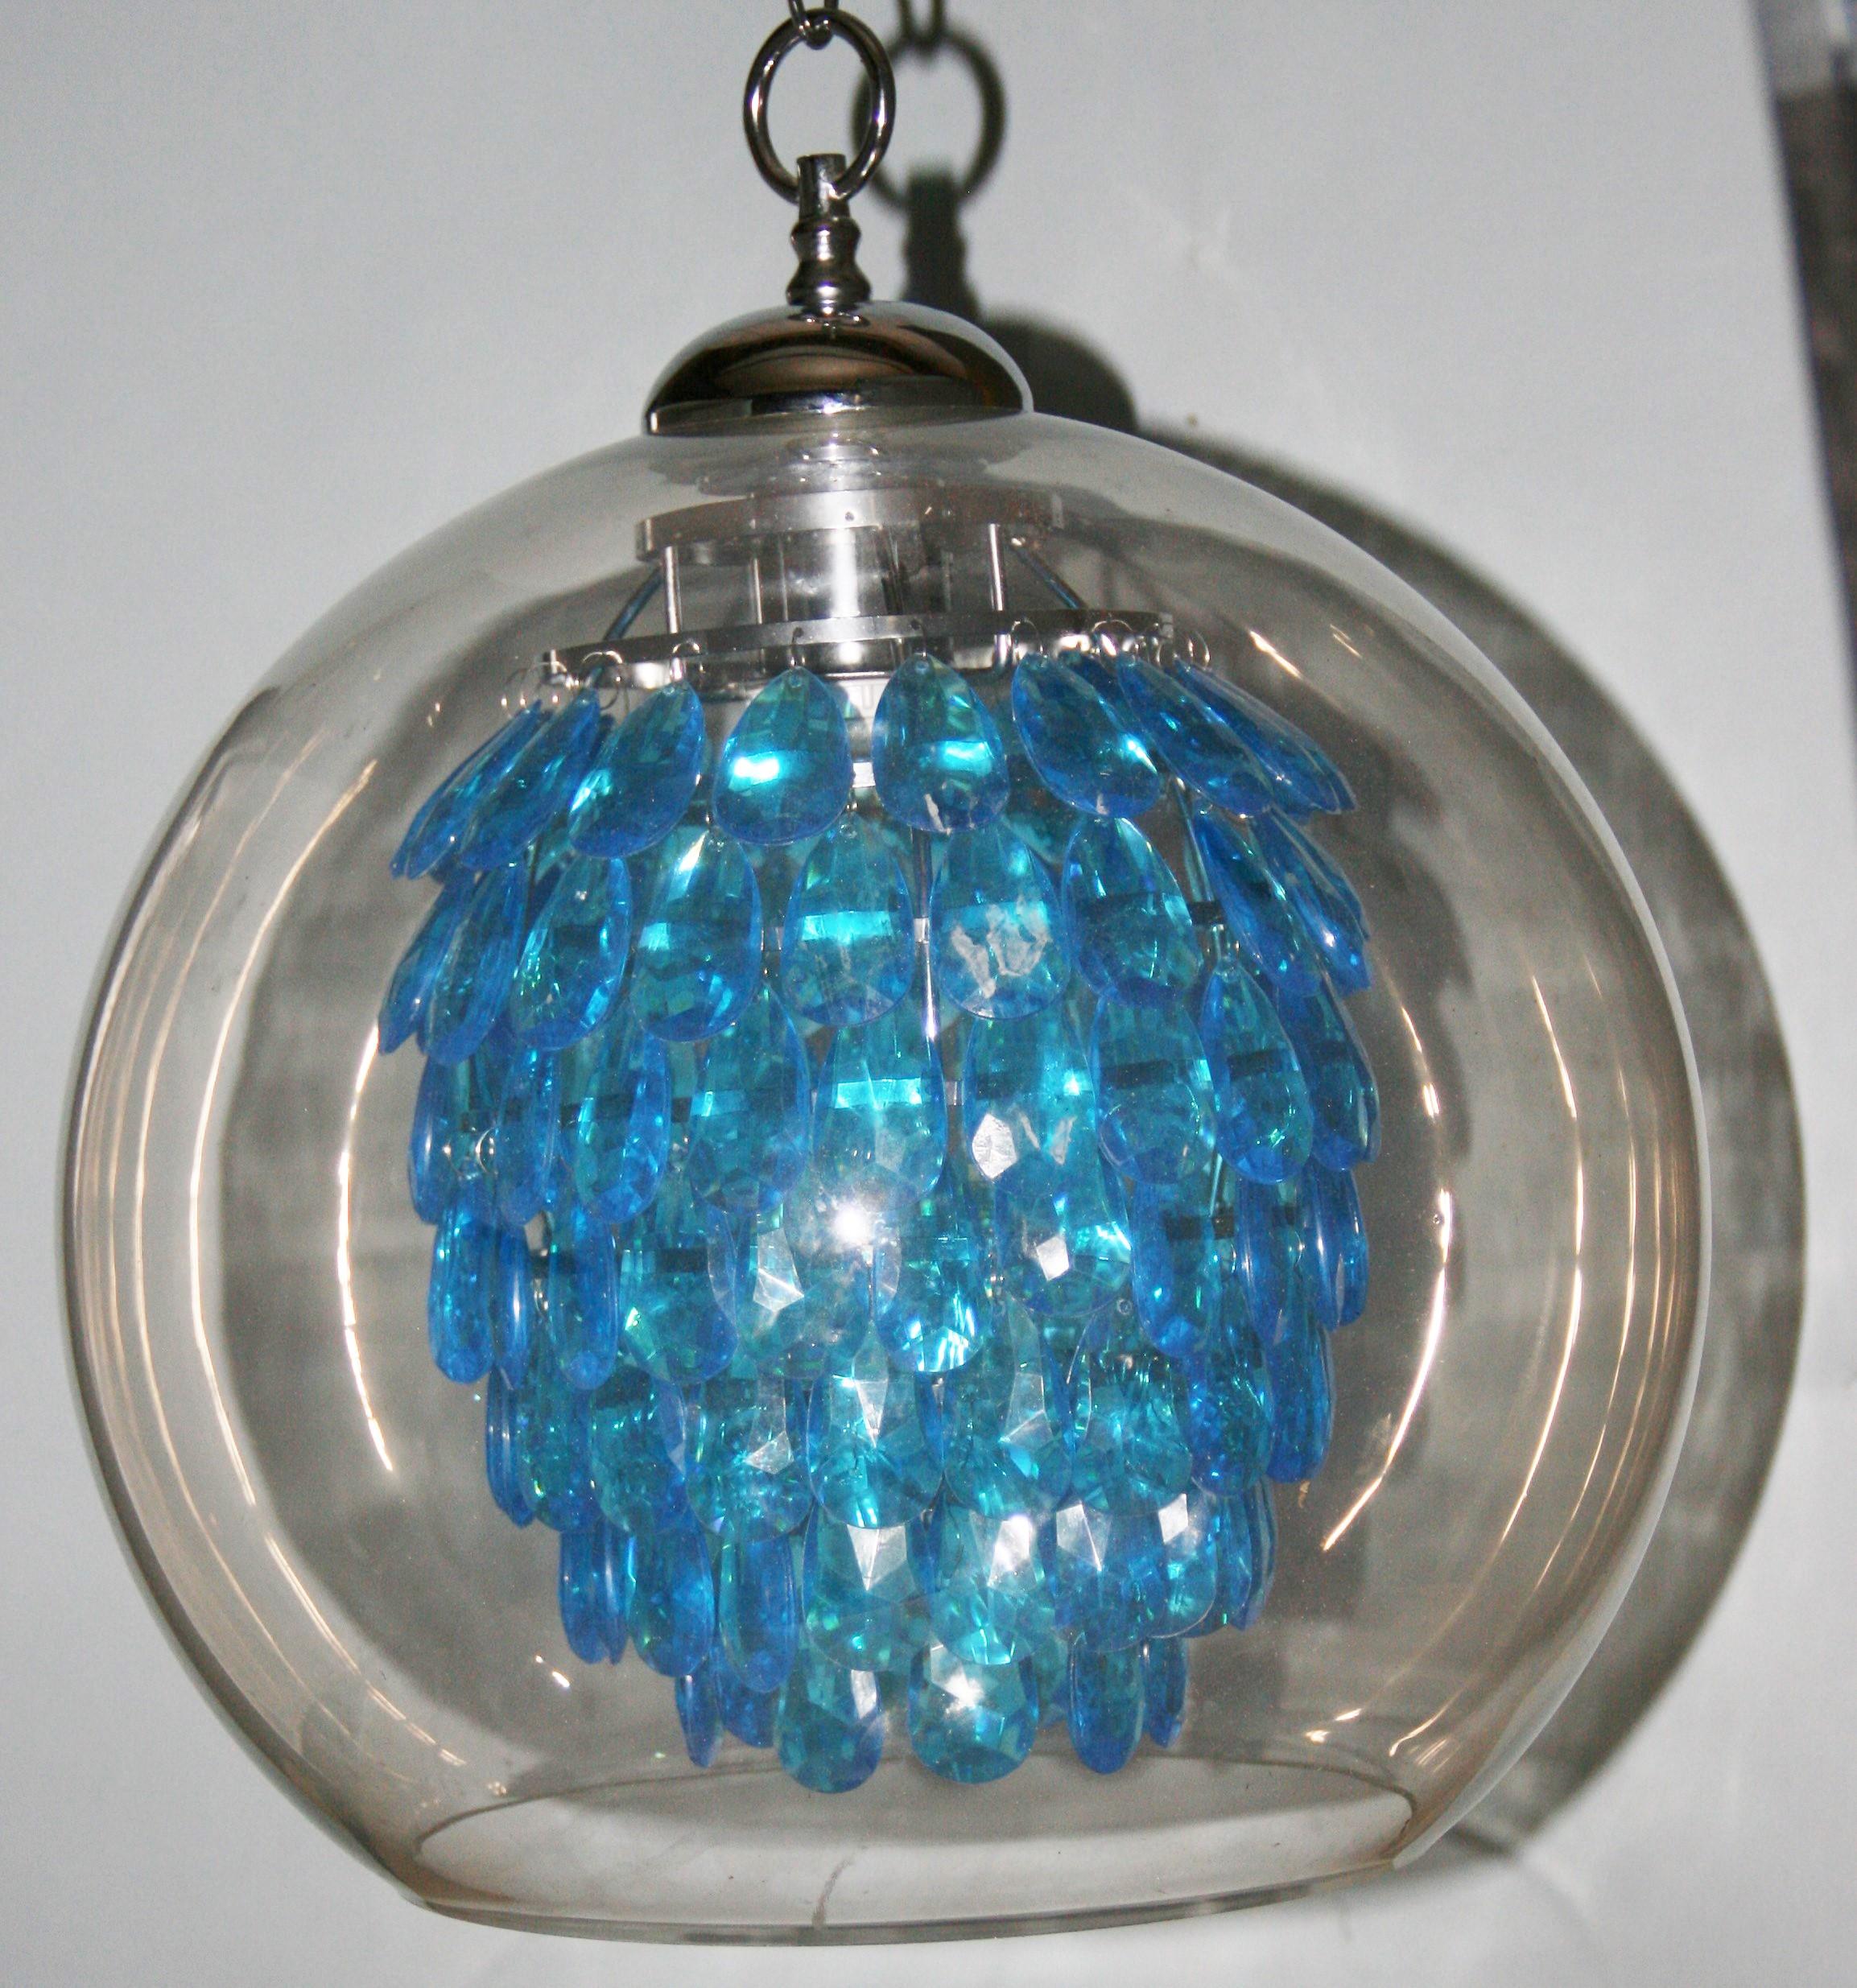 Late 20th Century Glass Dome Pendant with Blue Acrylic Prisms